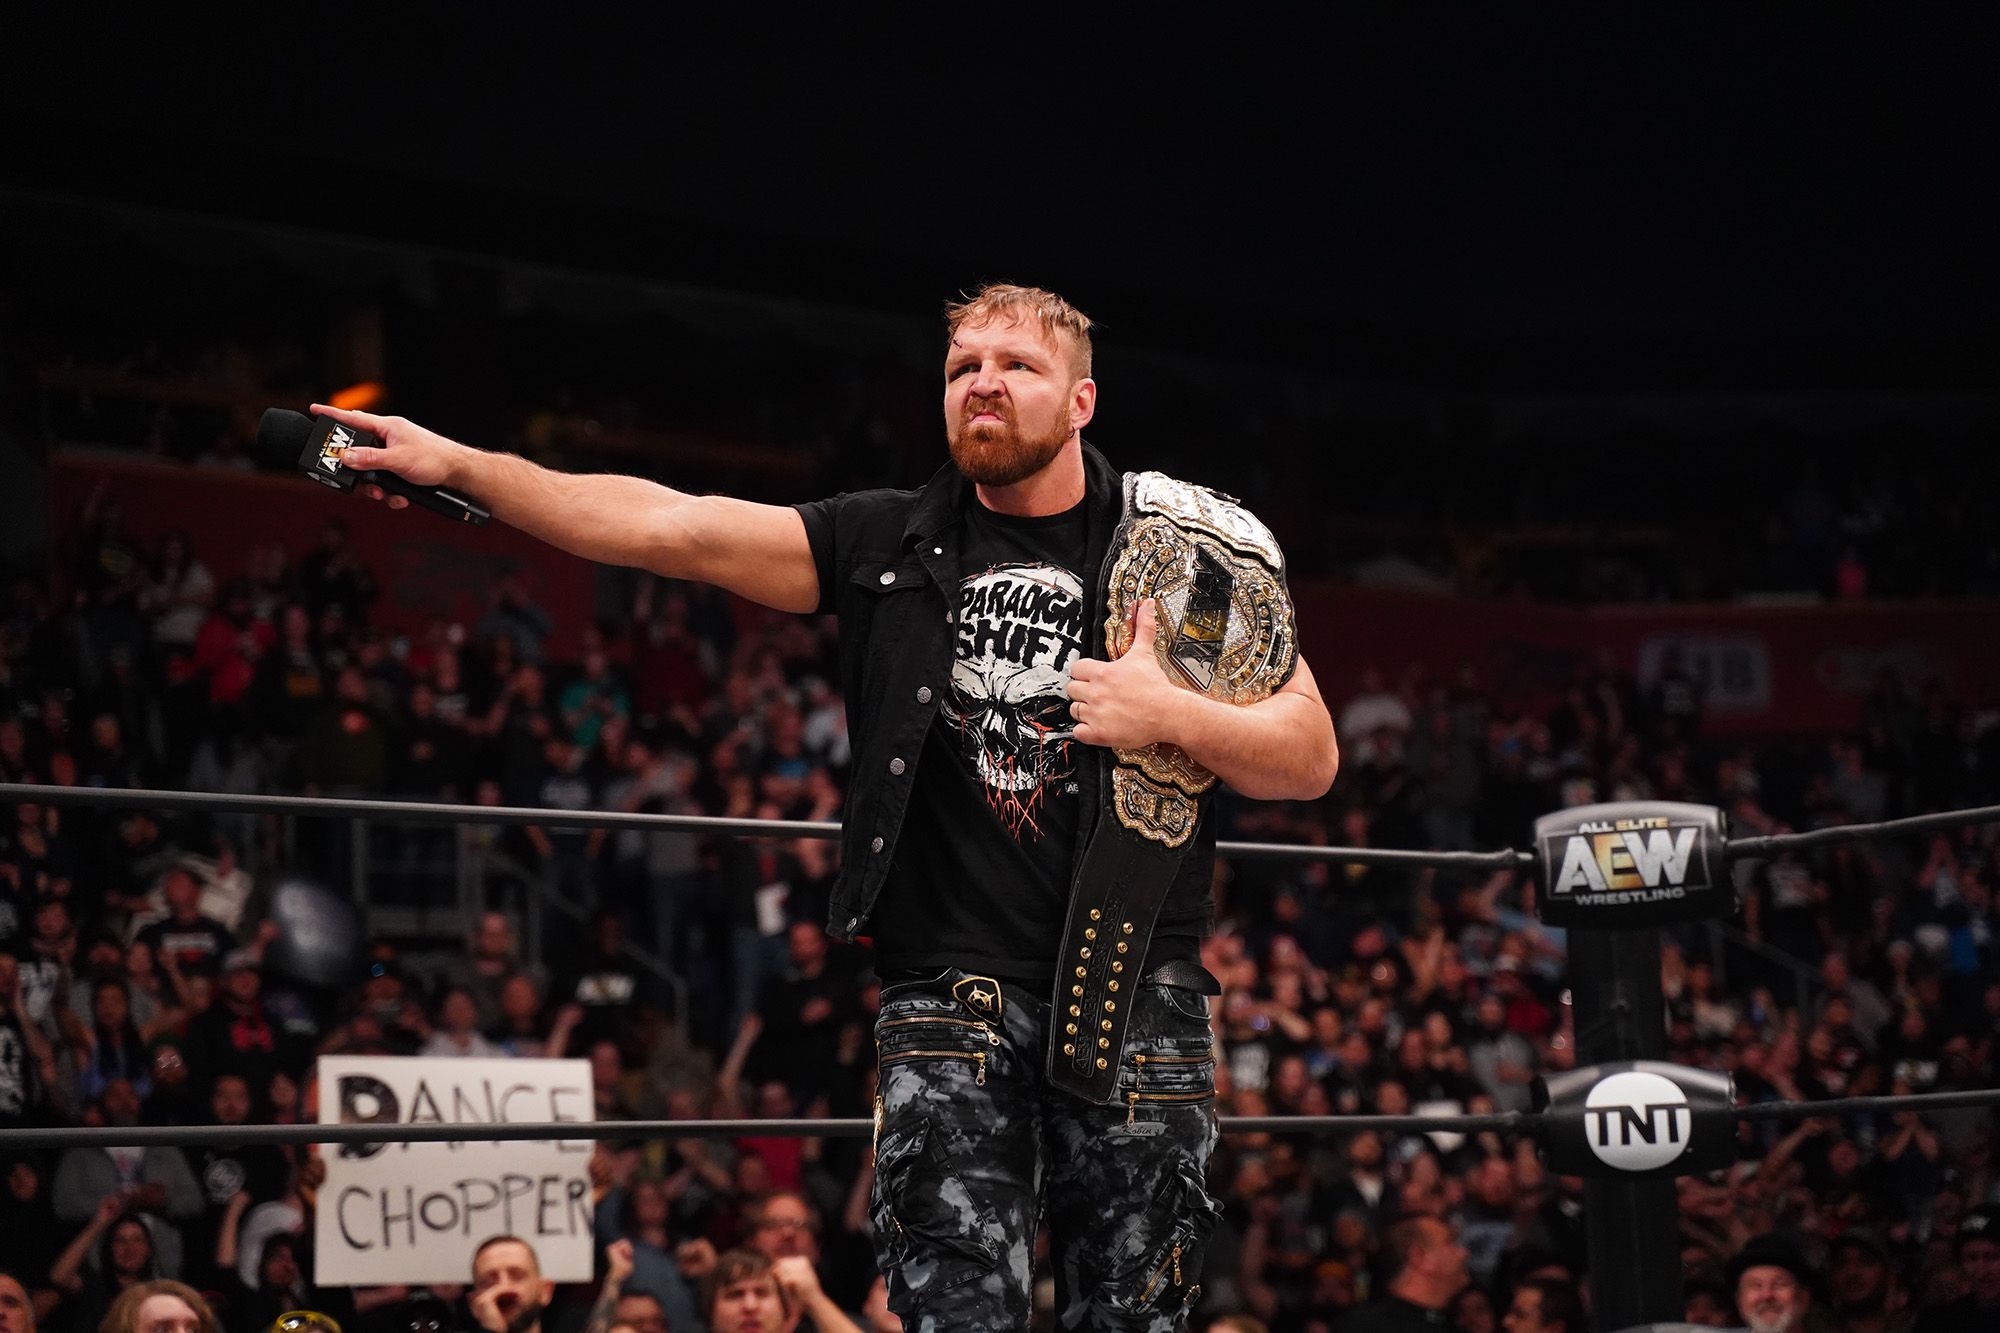 Dean Ambrose moved to AEW